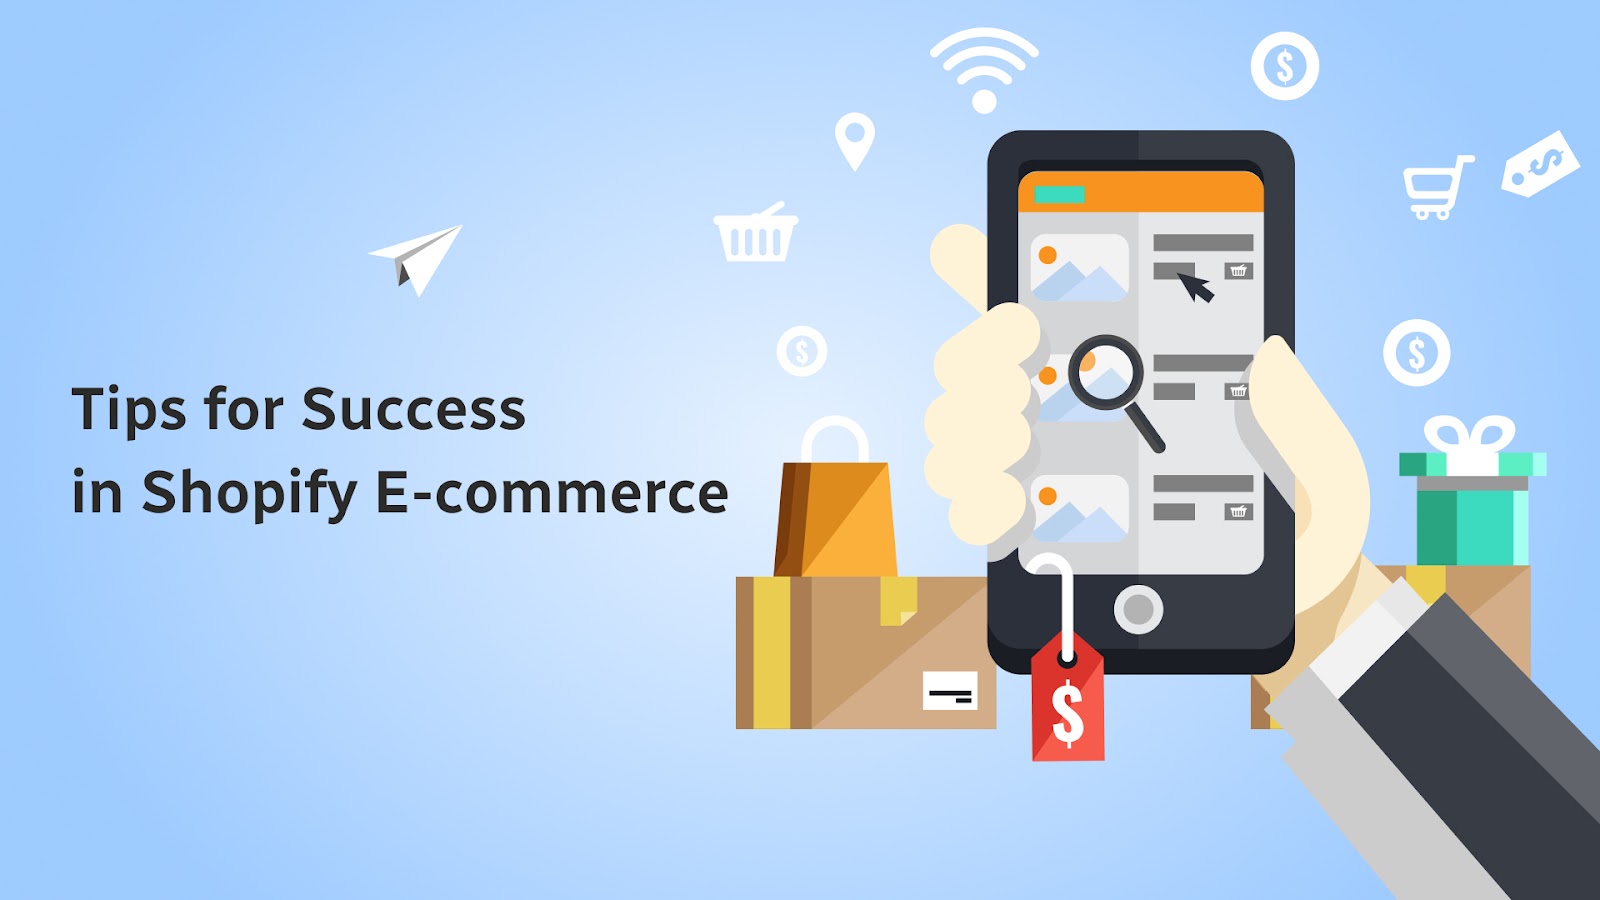 Tips for Success in Shopify E-commerce